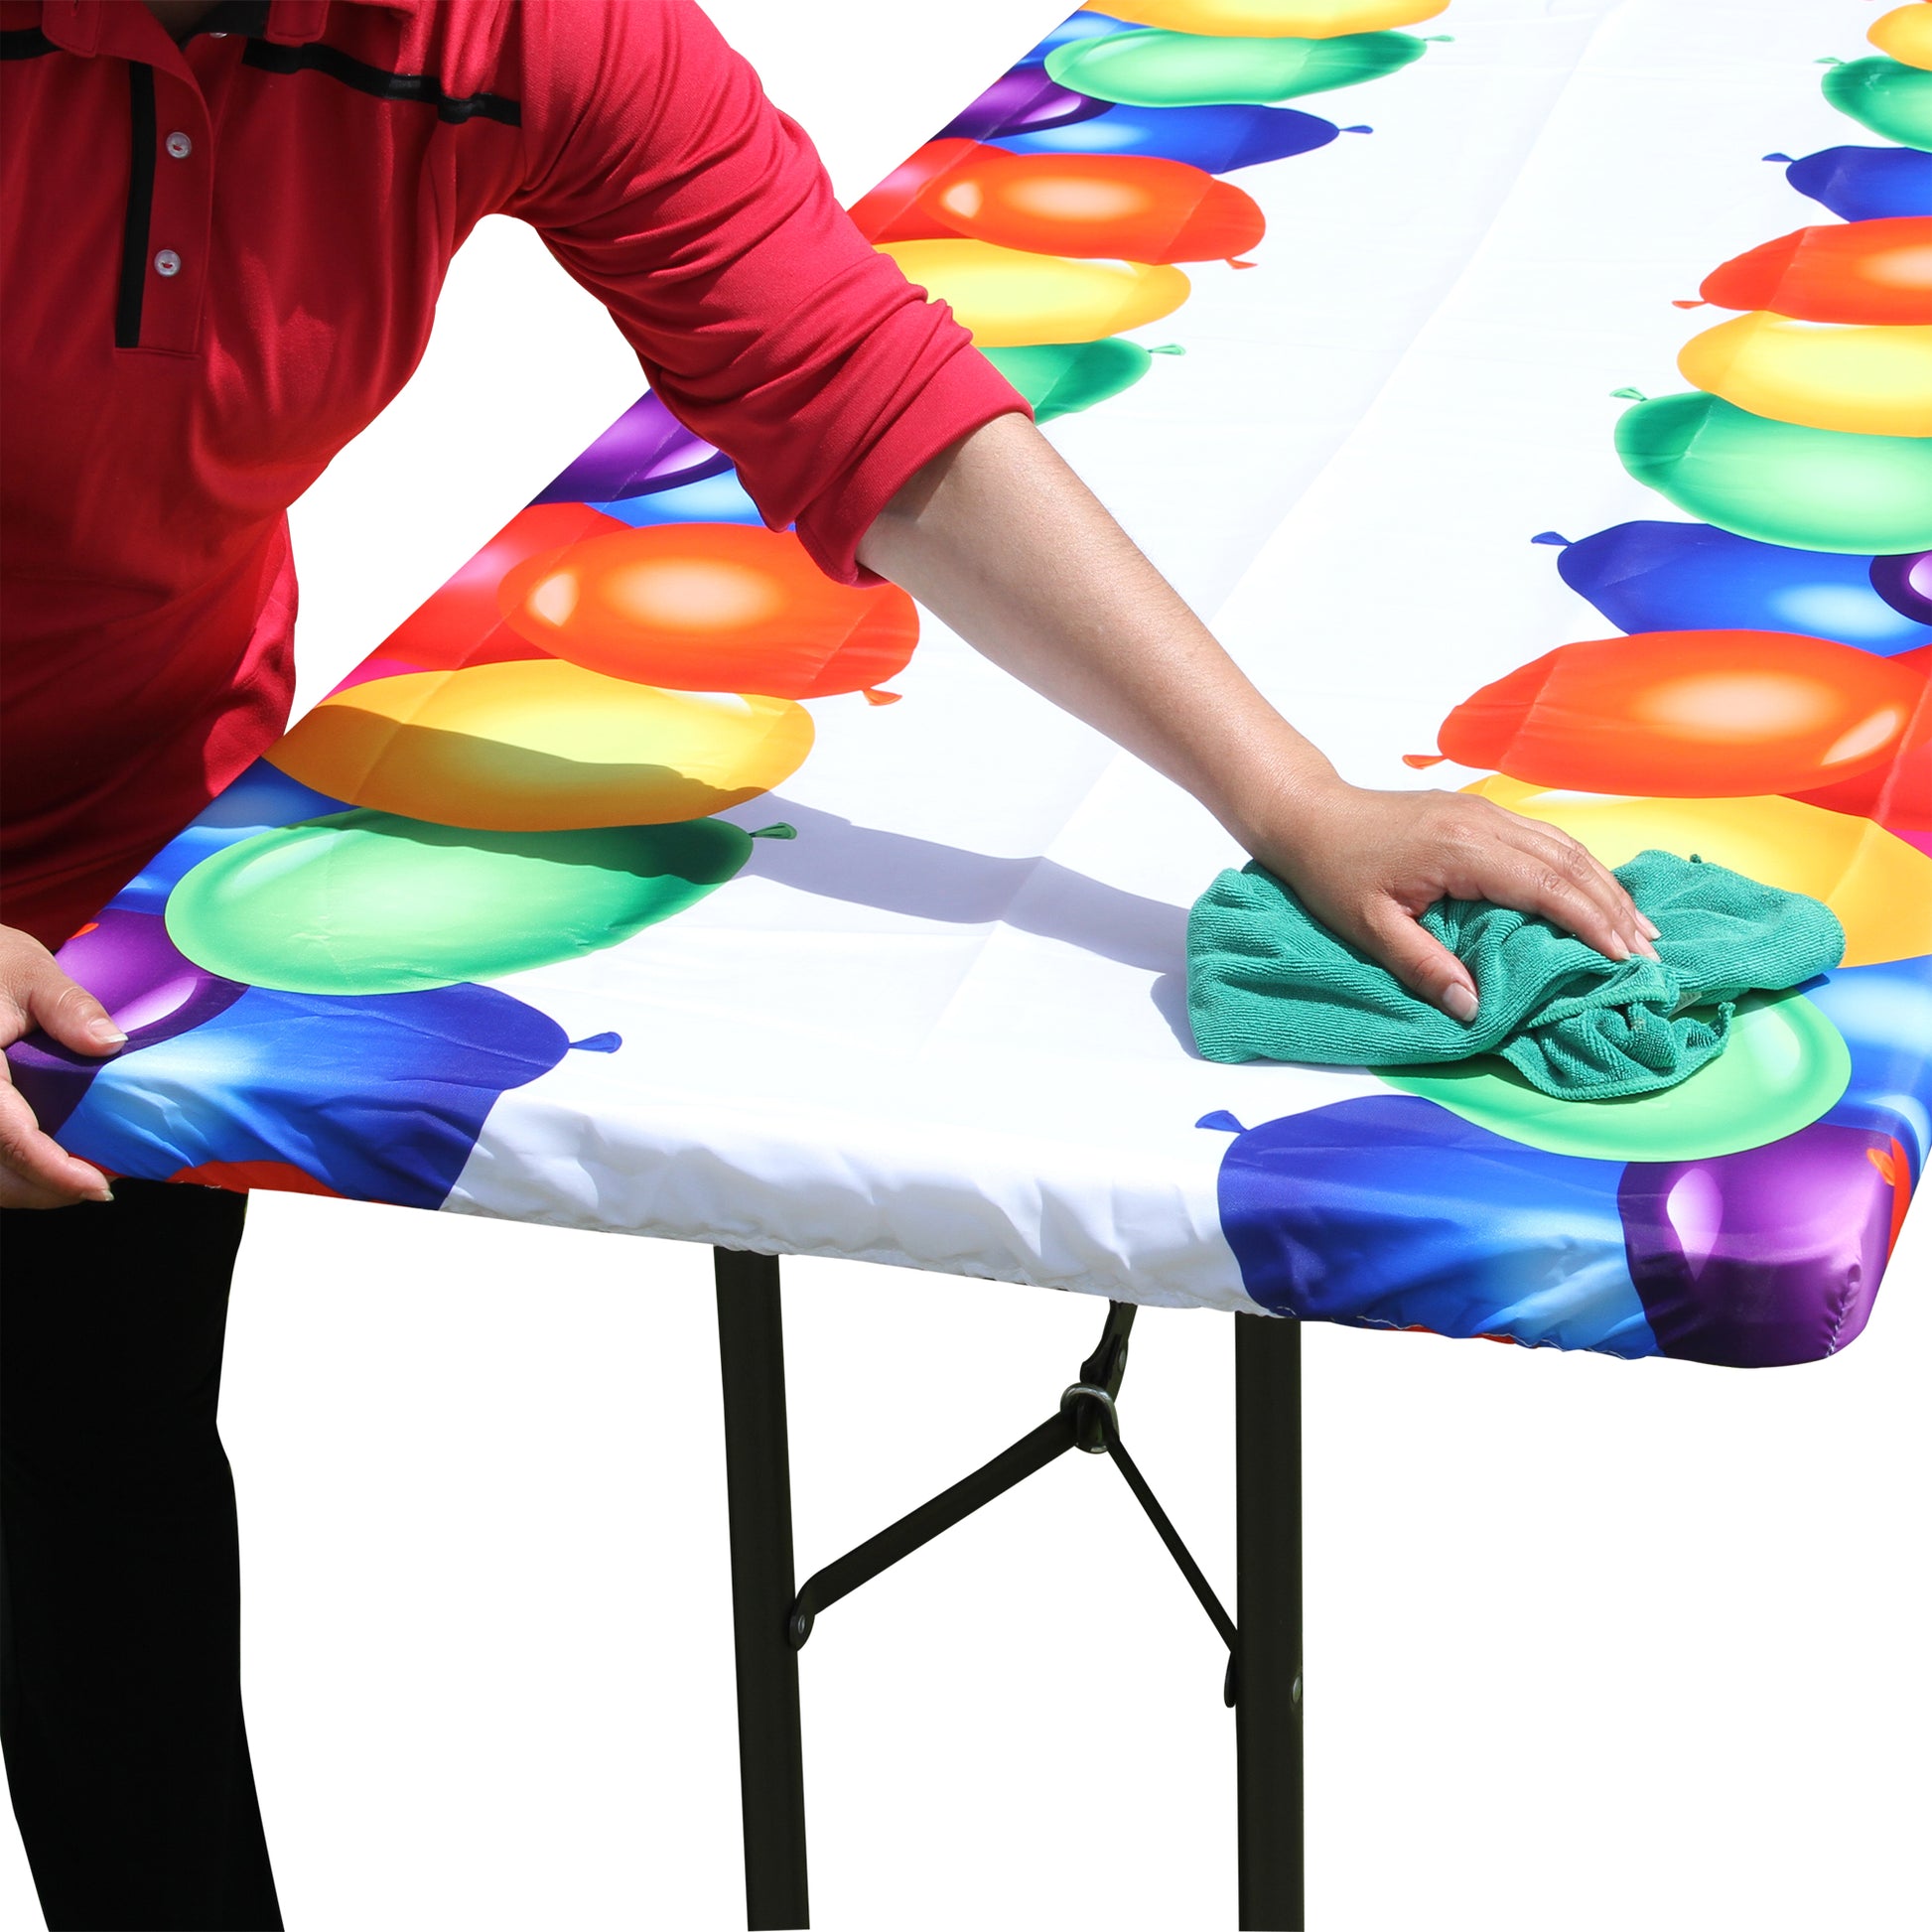 TableCloth PLUS 72" Balloons Fitted PEVA Vinyl Tablecloth for 6' Folding Tables is easy to clean, water proof, easy to install, and has an elastic rim